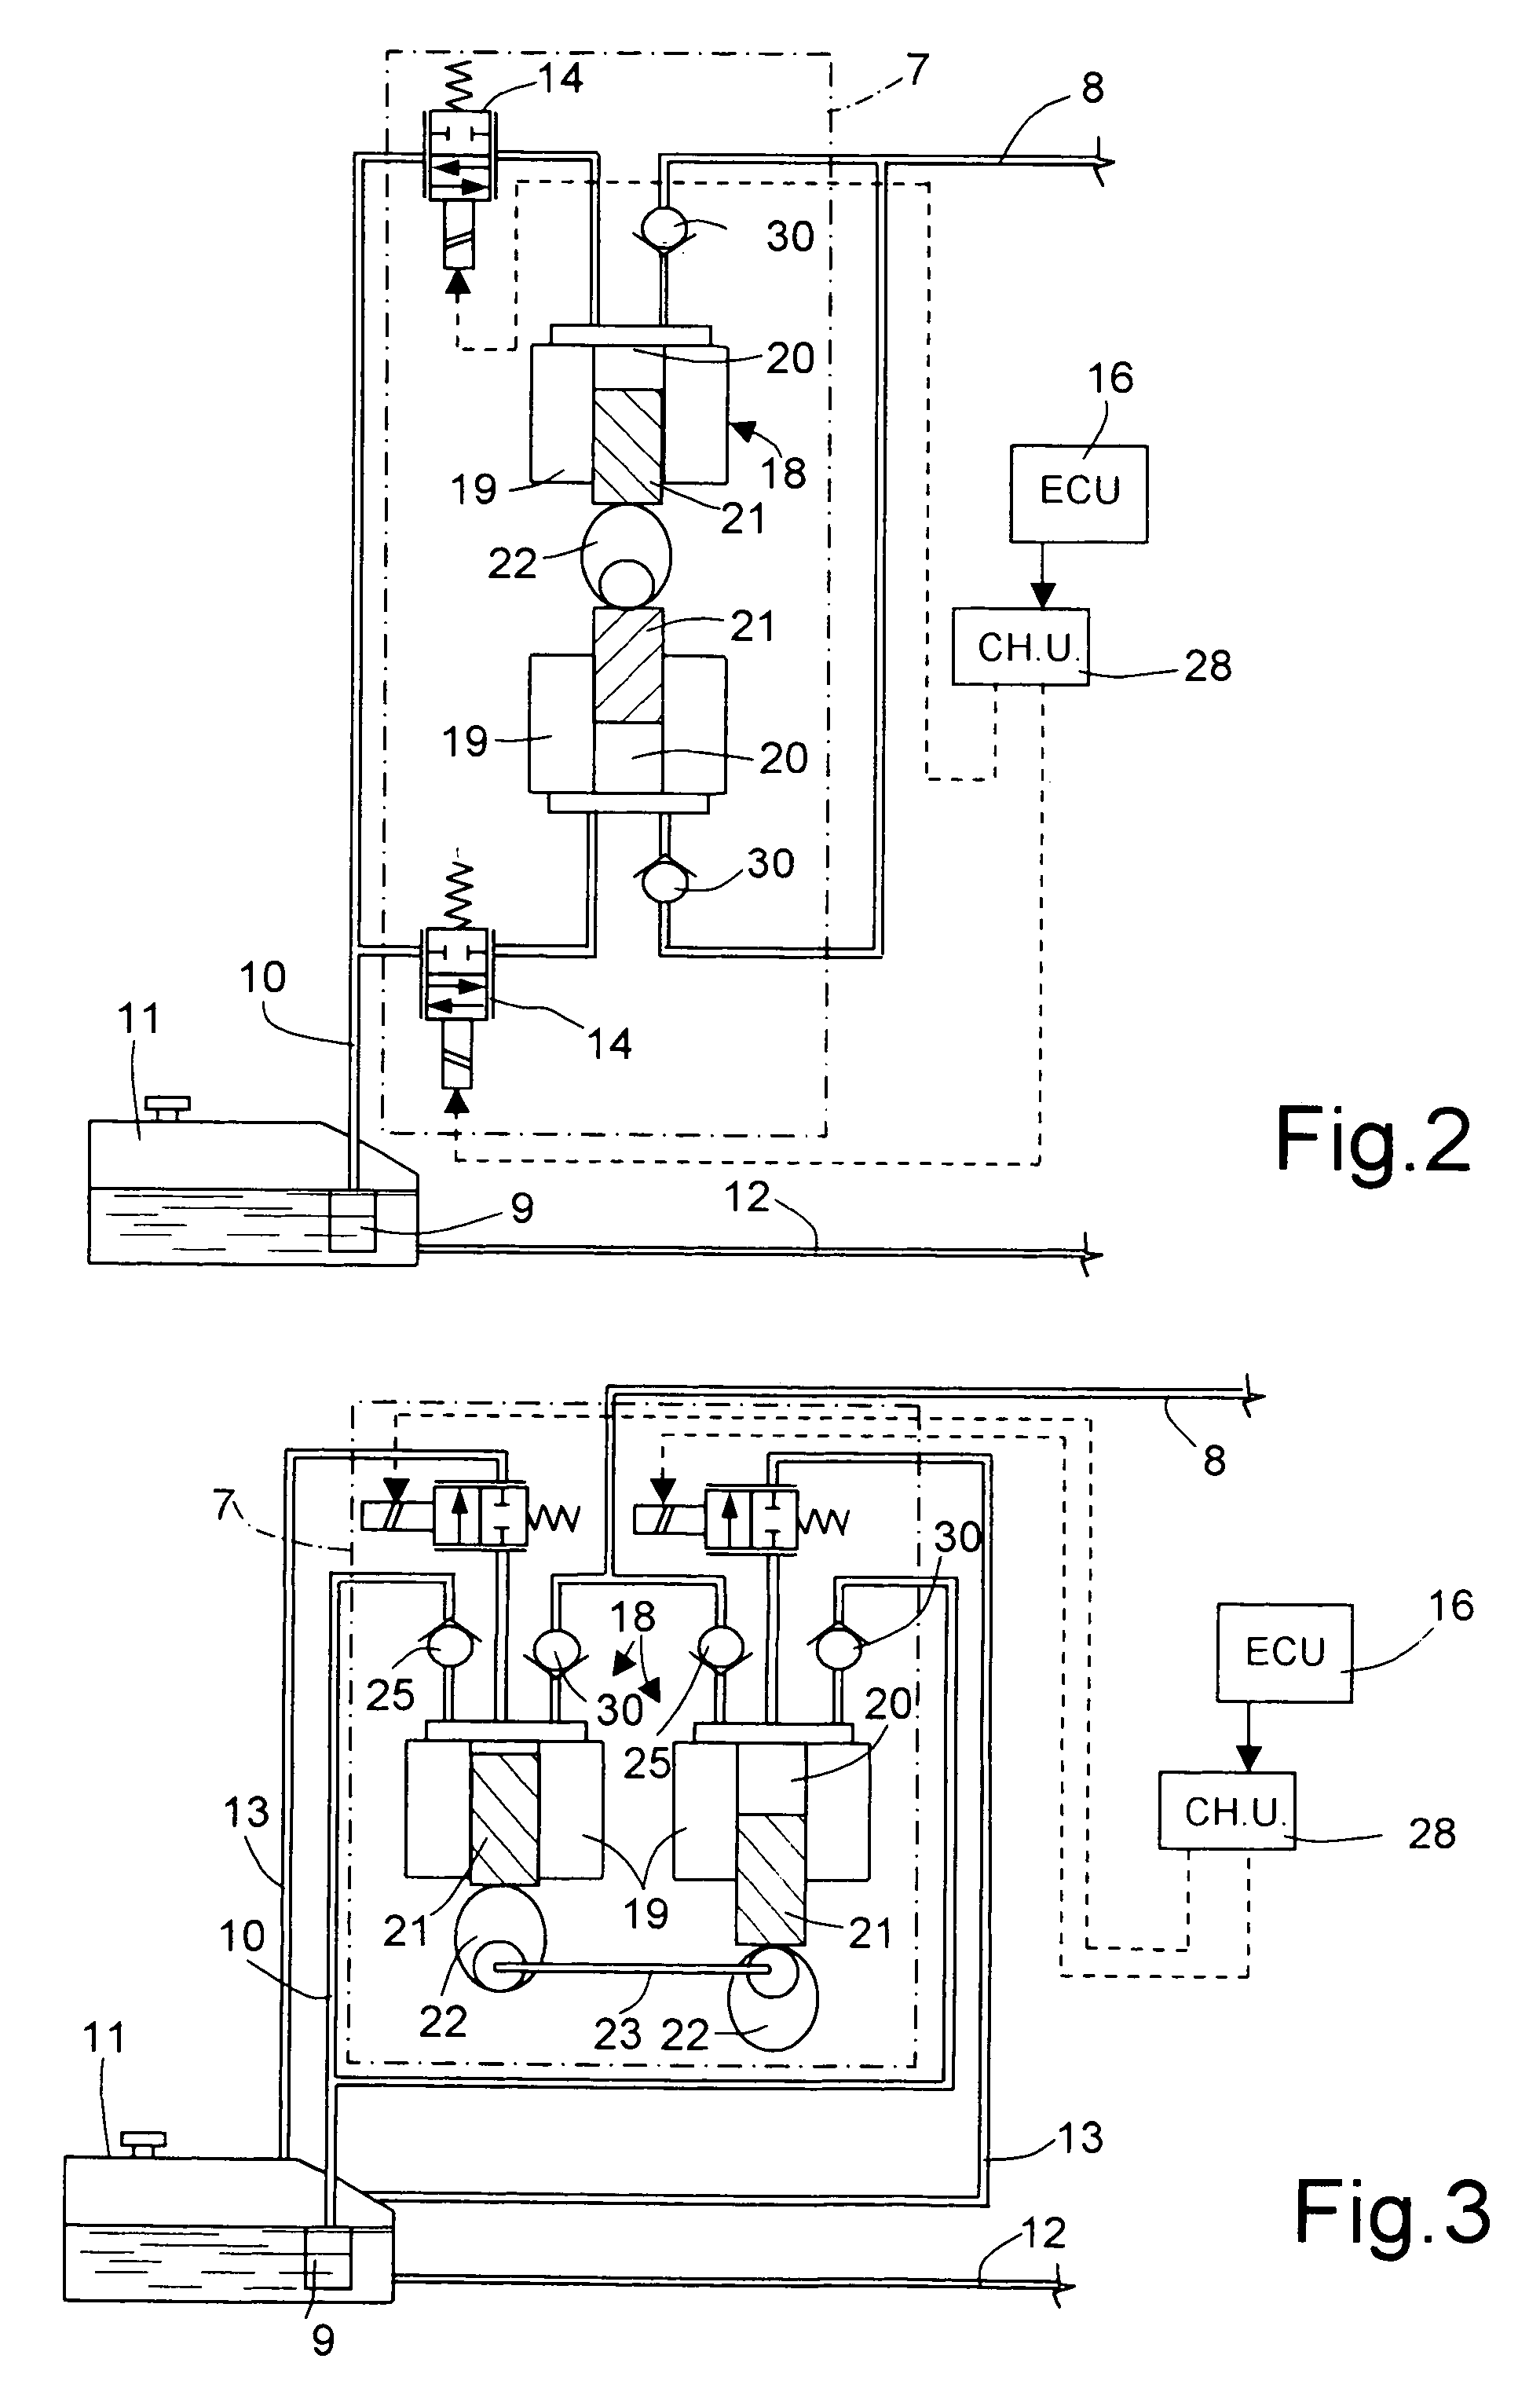 Storage-volume fuel injection system for an internal combustion engine